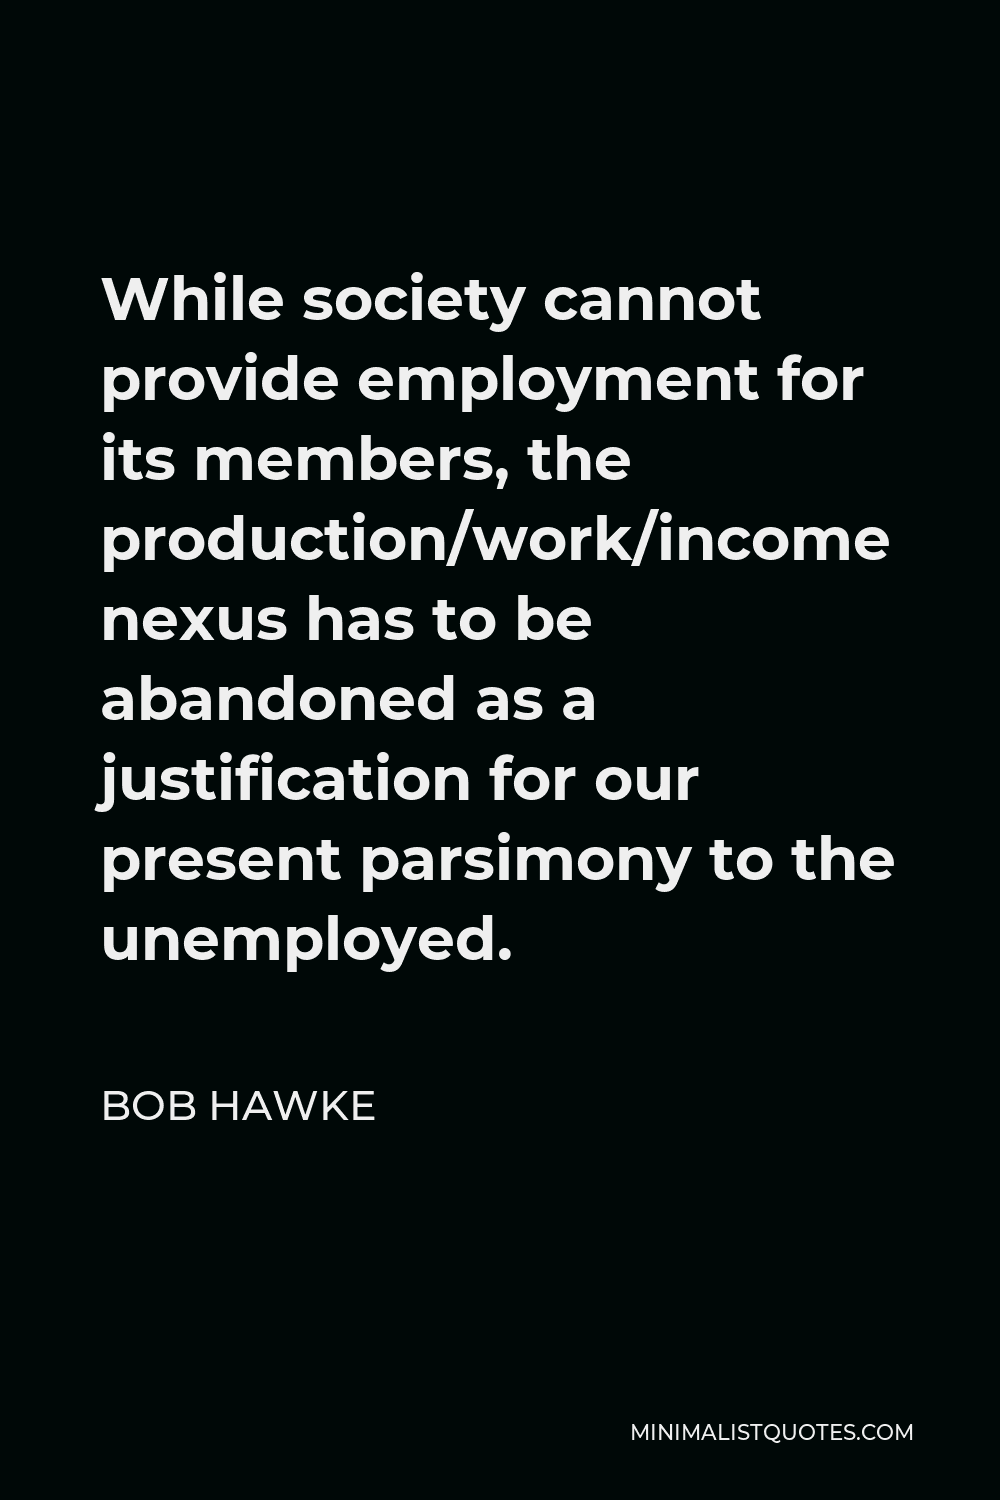 Bob Hawke Quote - While society cannot provide employment for its members, the production/work/income nexus has to be abandoned as a justification for our present parsimony to the unemployed.